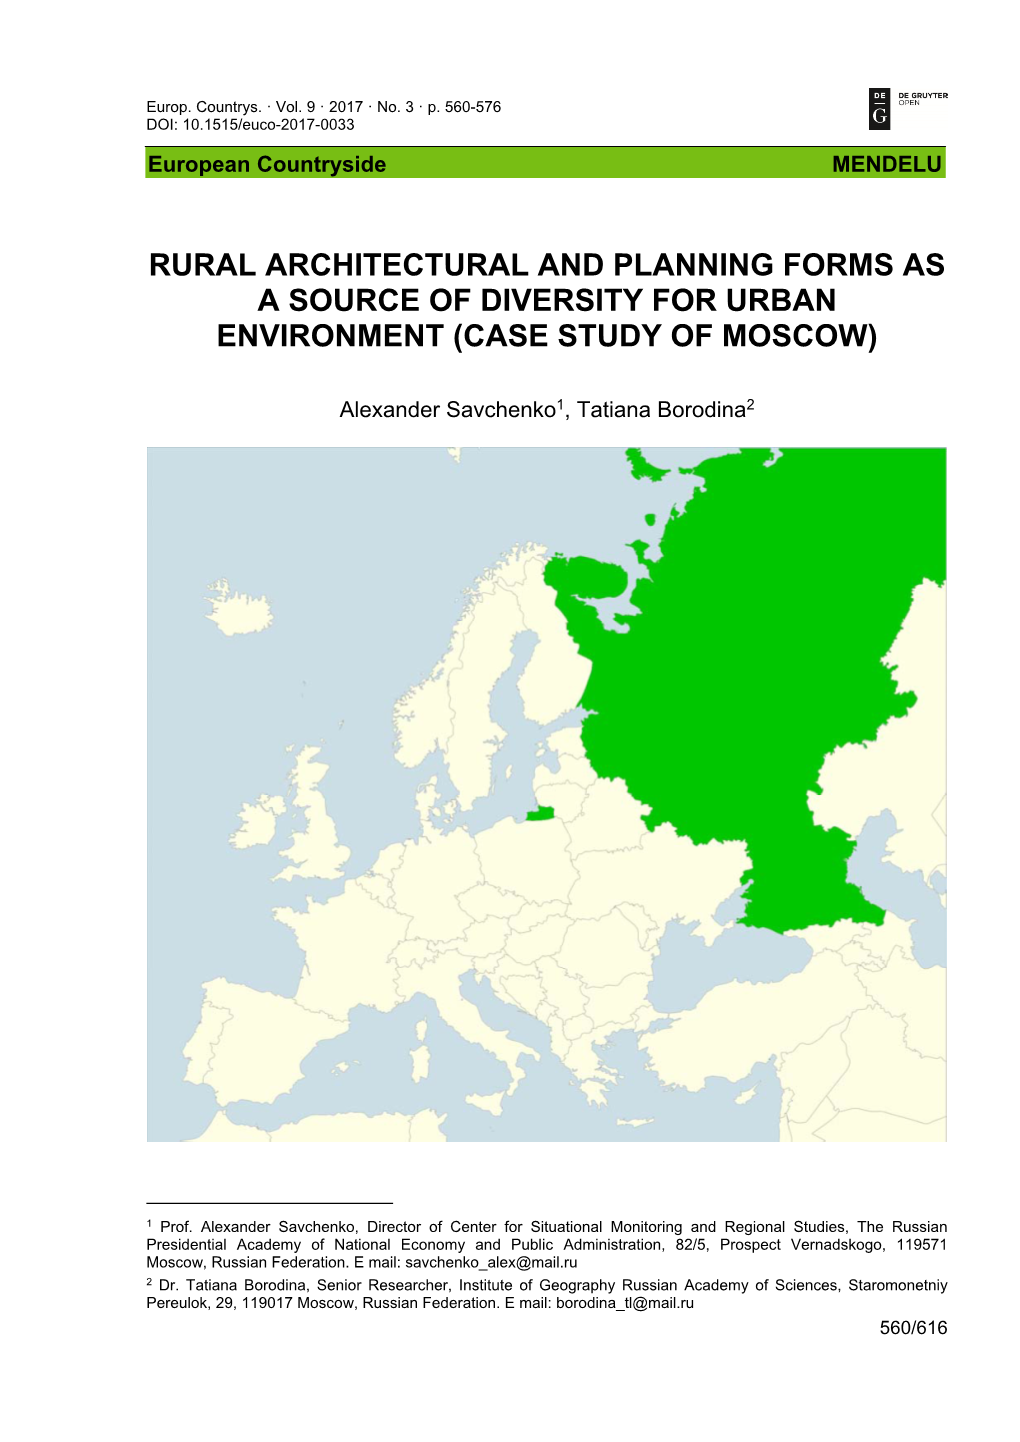 Rural Architectural and Planning Forms As a Source of Diversity for Urban Environment (Case Study of Moscow)